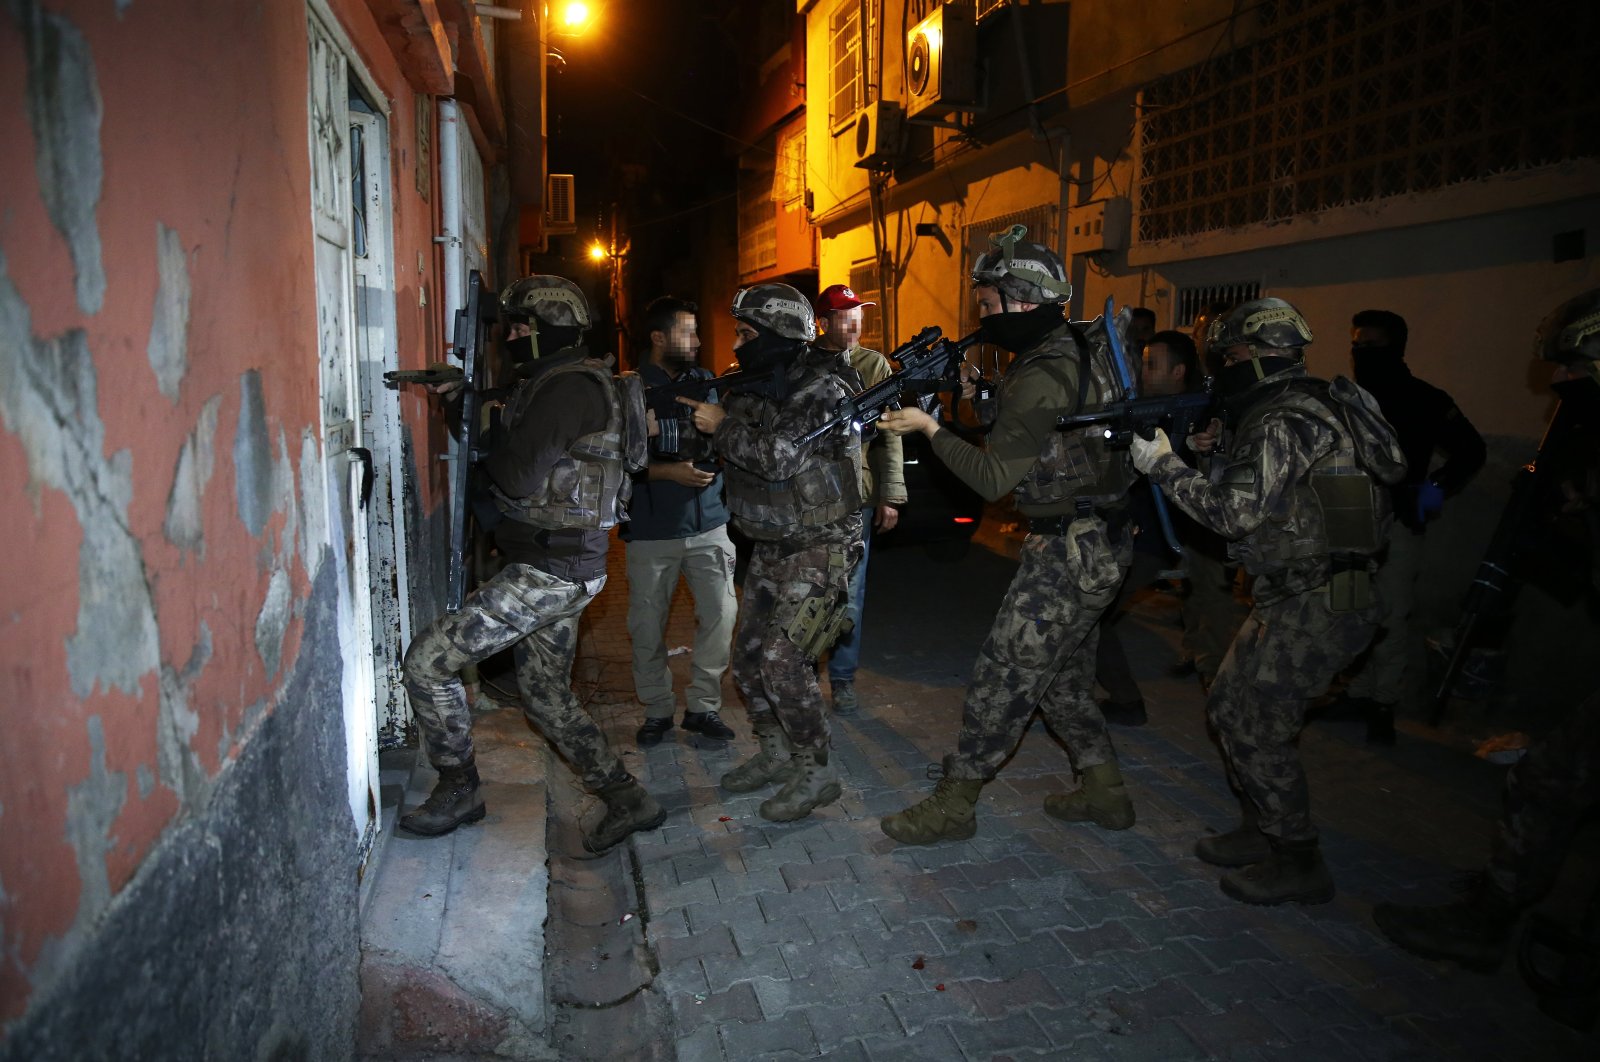 Counterterrorism squads carry out a raid against suspected terrorists in Adana province, Turkey, March 12, 2020. (Sabah File Photo)